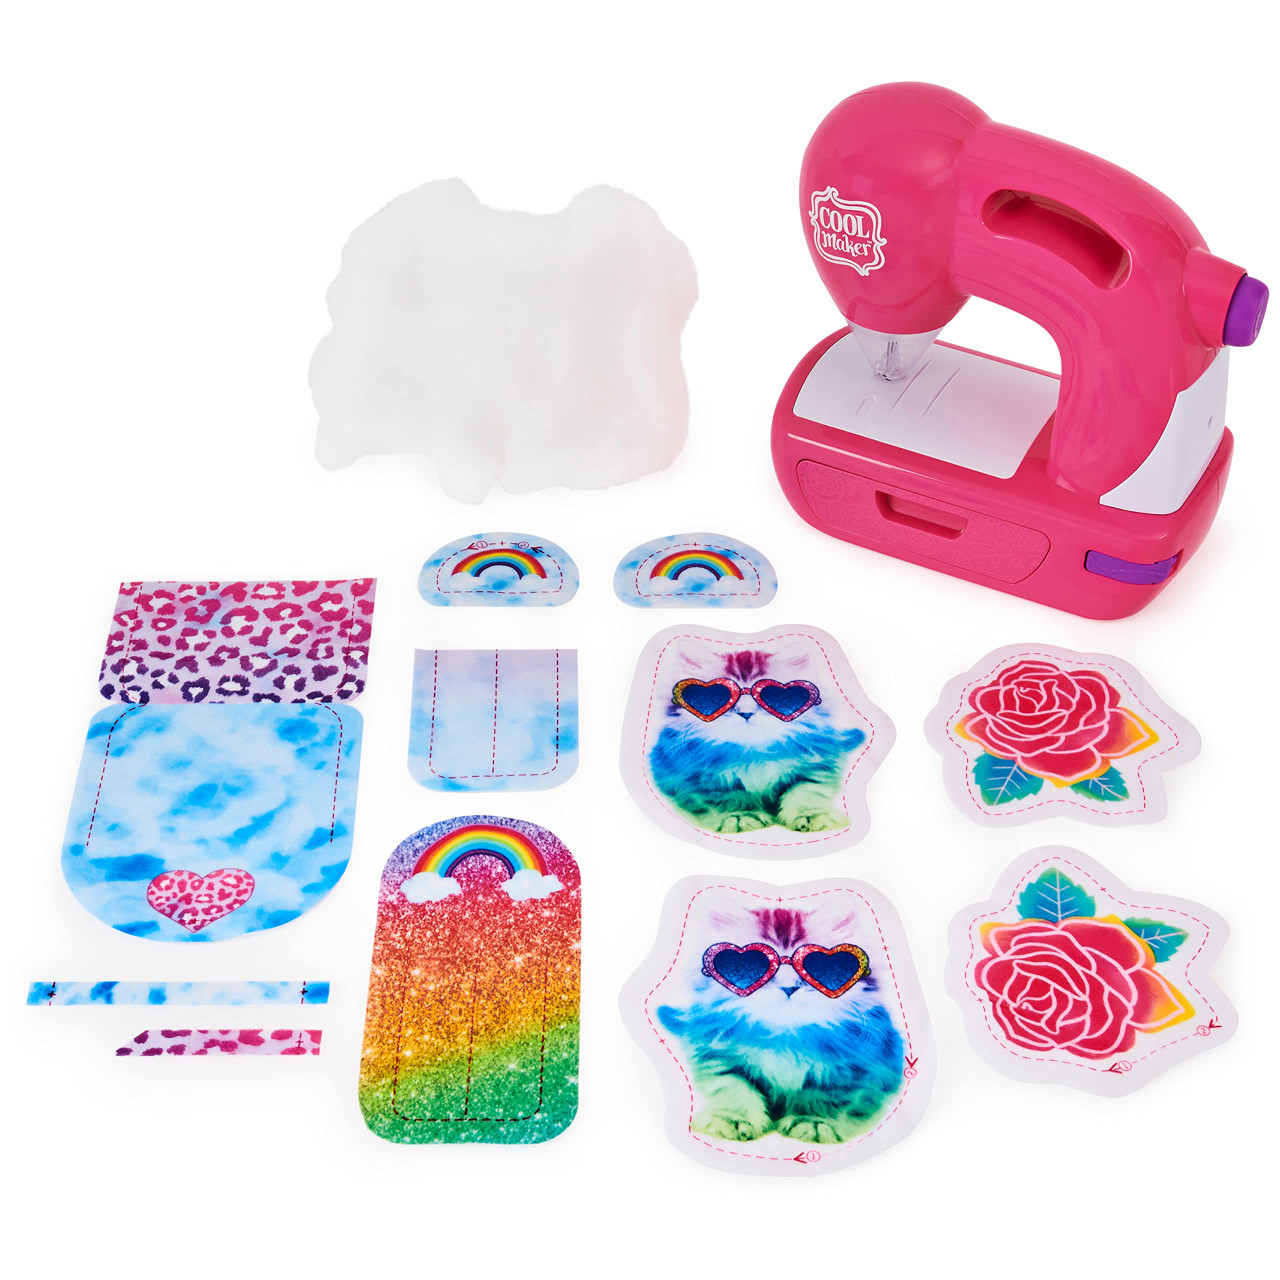 Cool Maker, Sew Cool Sewing Machine with 5 Trendy Projects and Fabric, for  Kids 6 Aged and Up - Toys 4 U